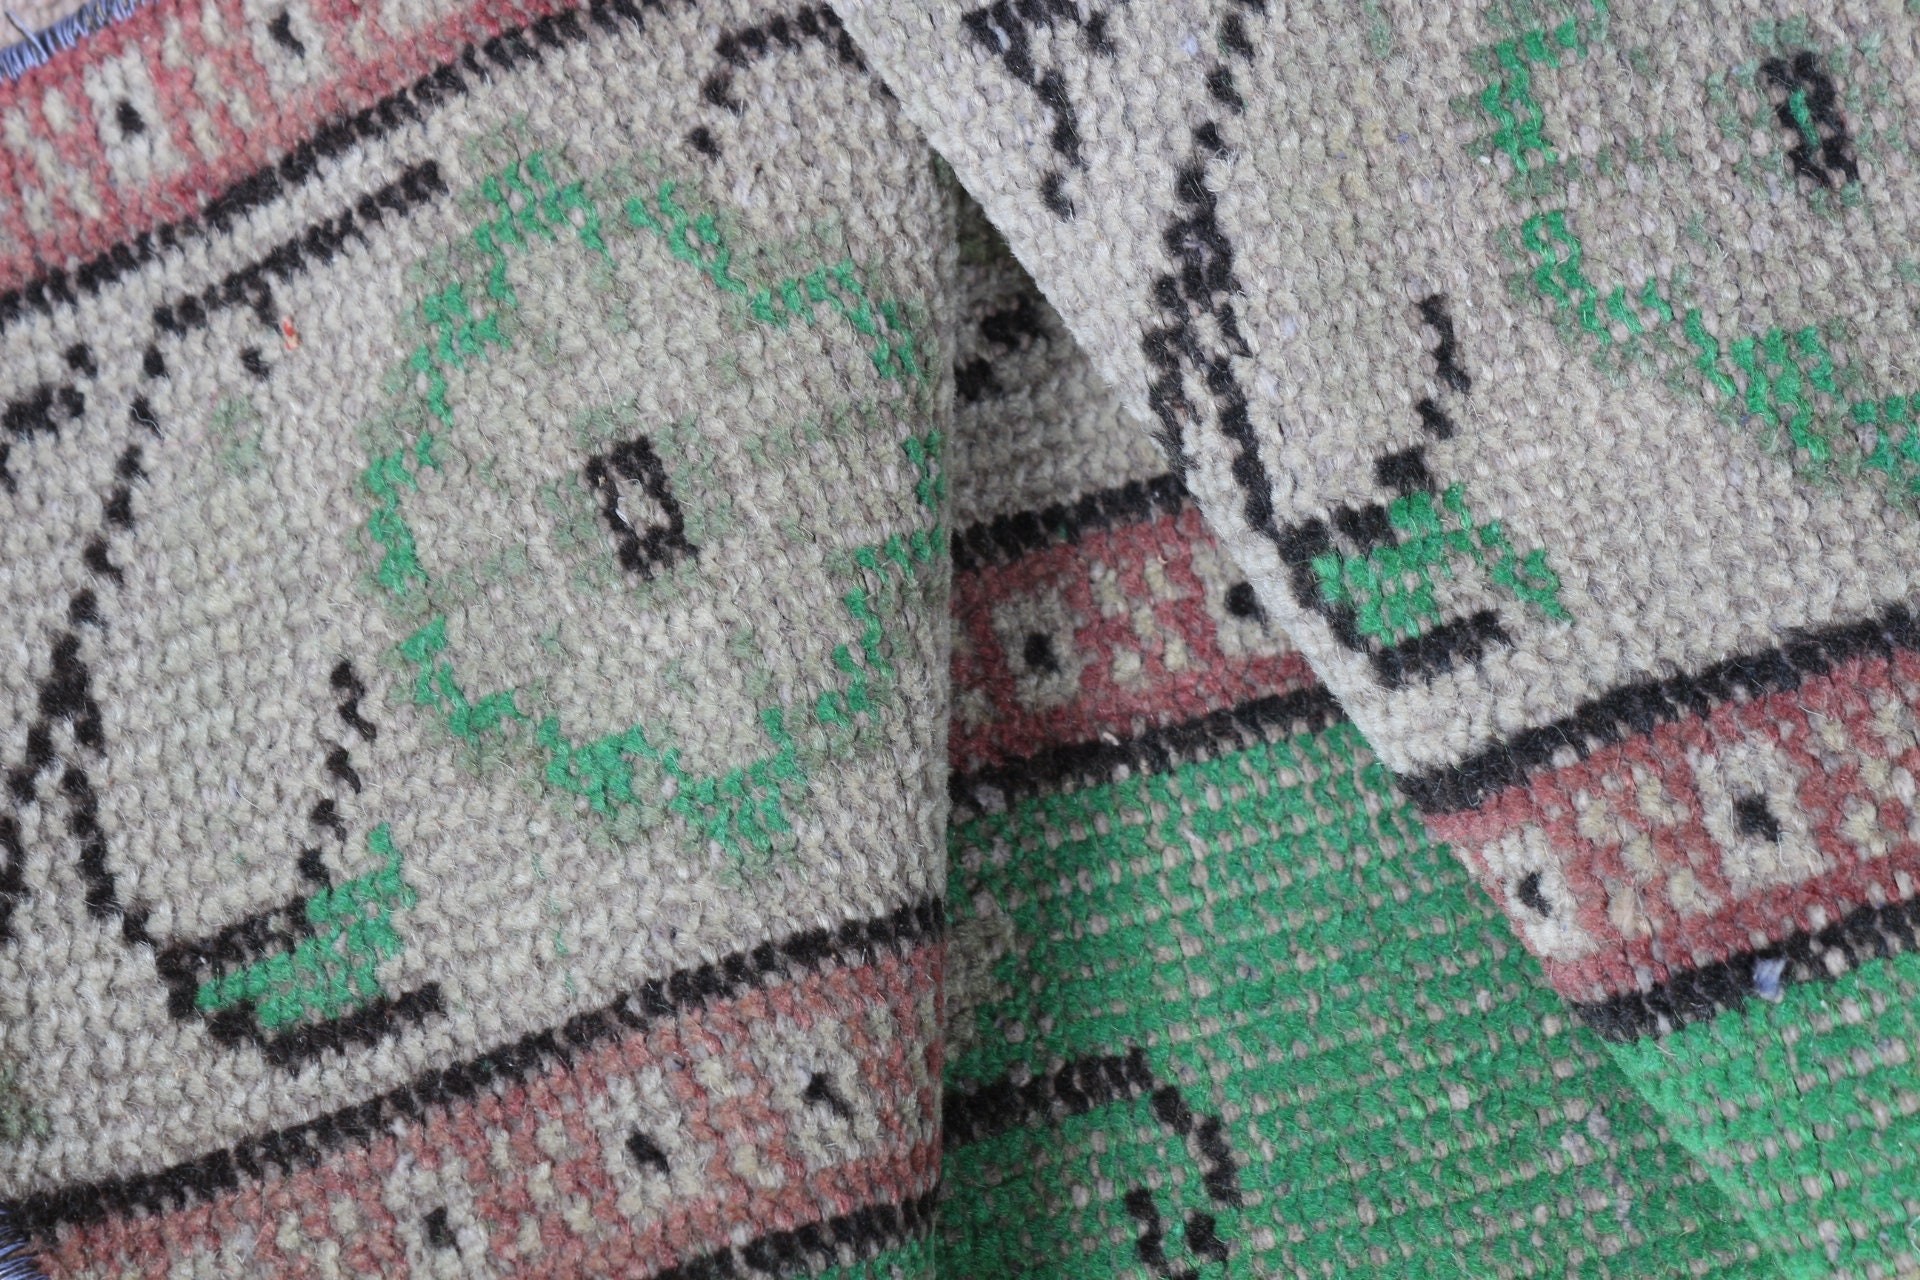 Green Antique Rugs, Bohemian Rug, Vintage Rug, Home Decor Rugs, Kitchen Rugs, 2.5x1.5 ft Small Rug, Turkish Rug, Bathroom Rugs, Cool Rugs